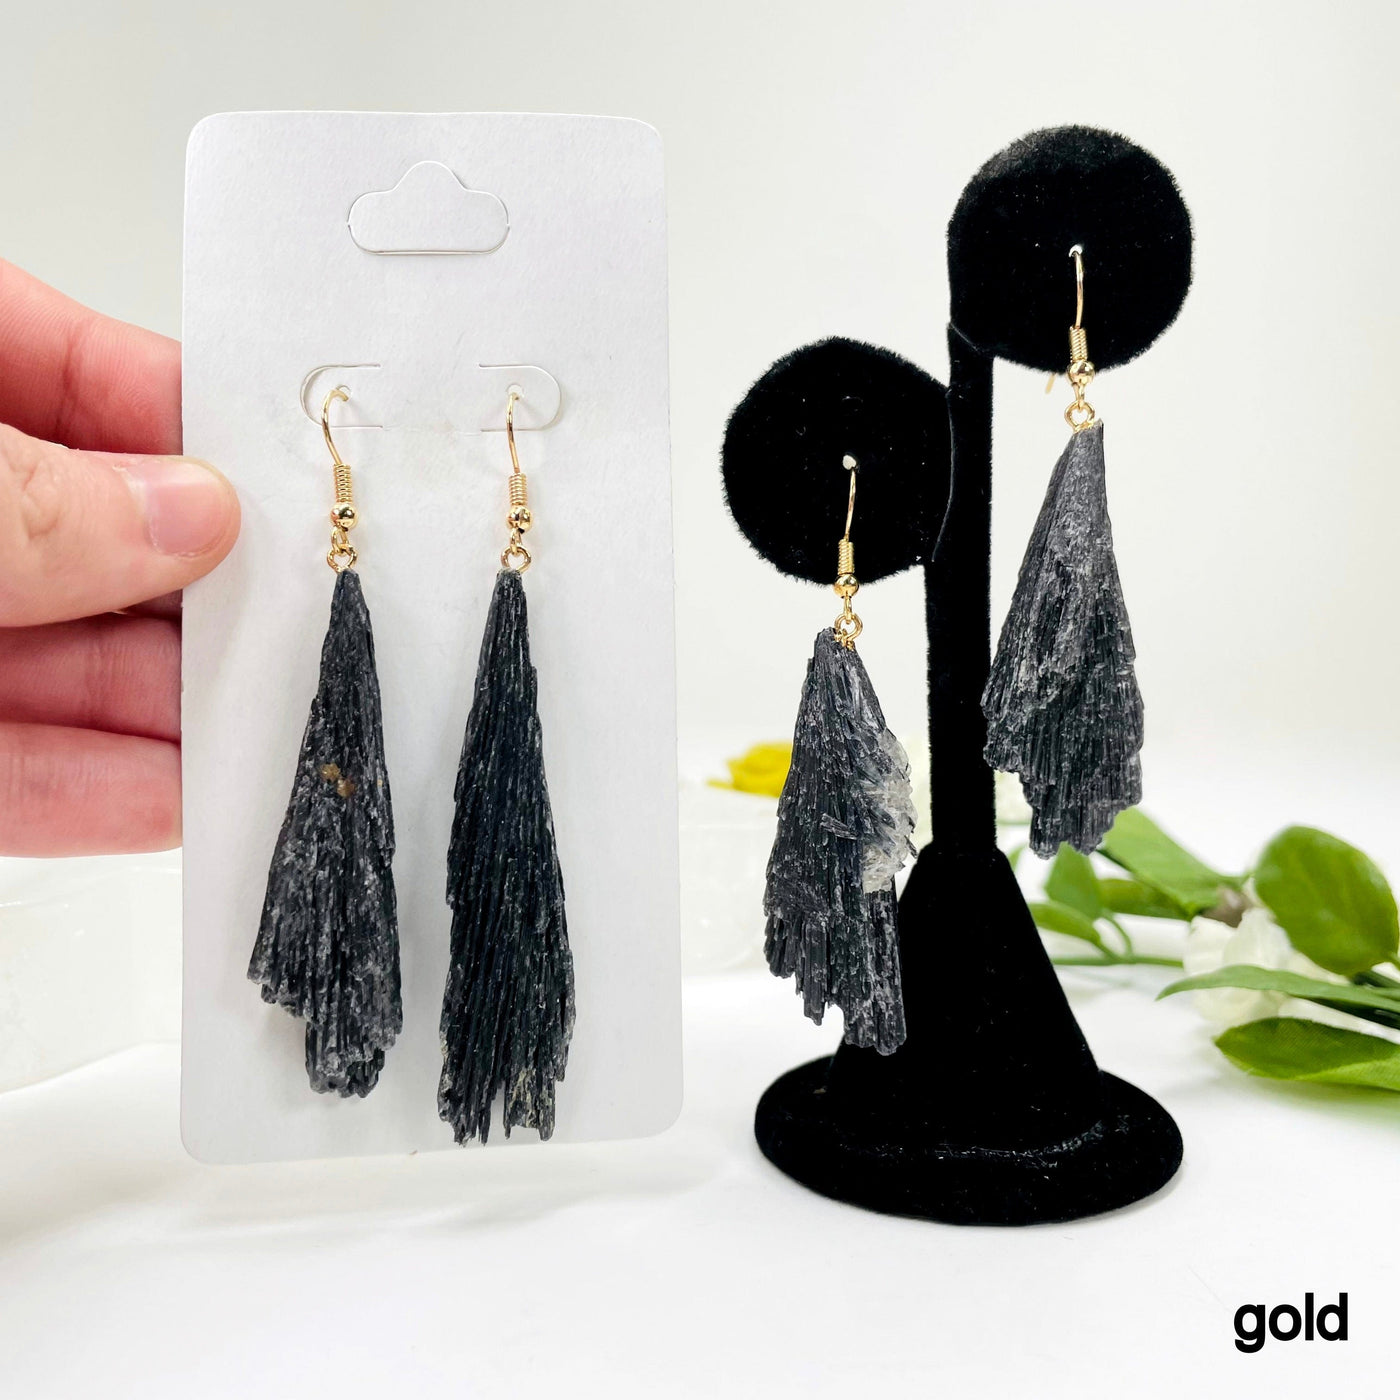 one gold black kyanite fan dangle earring pair on earring display and a second one in its packaging in hand for possible variations